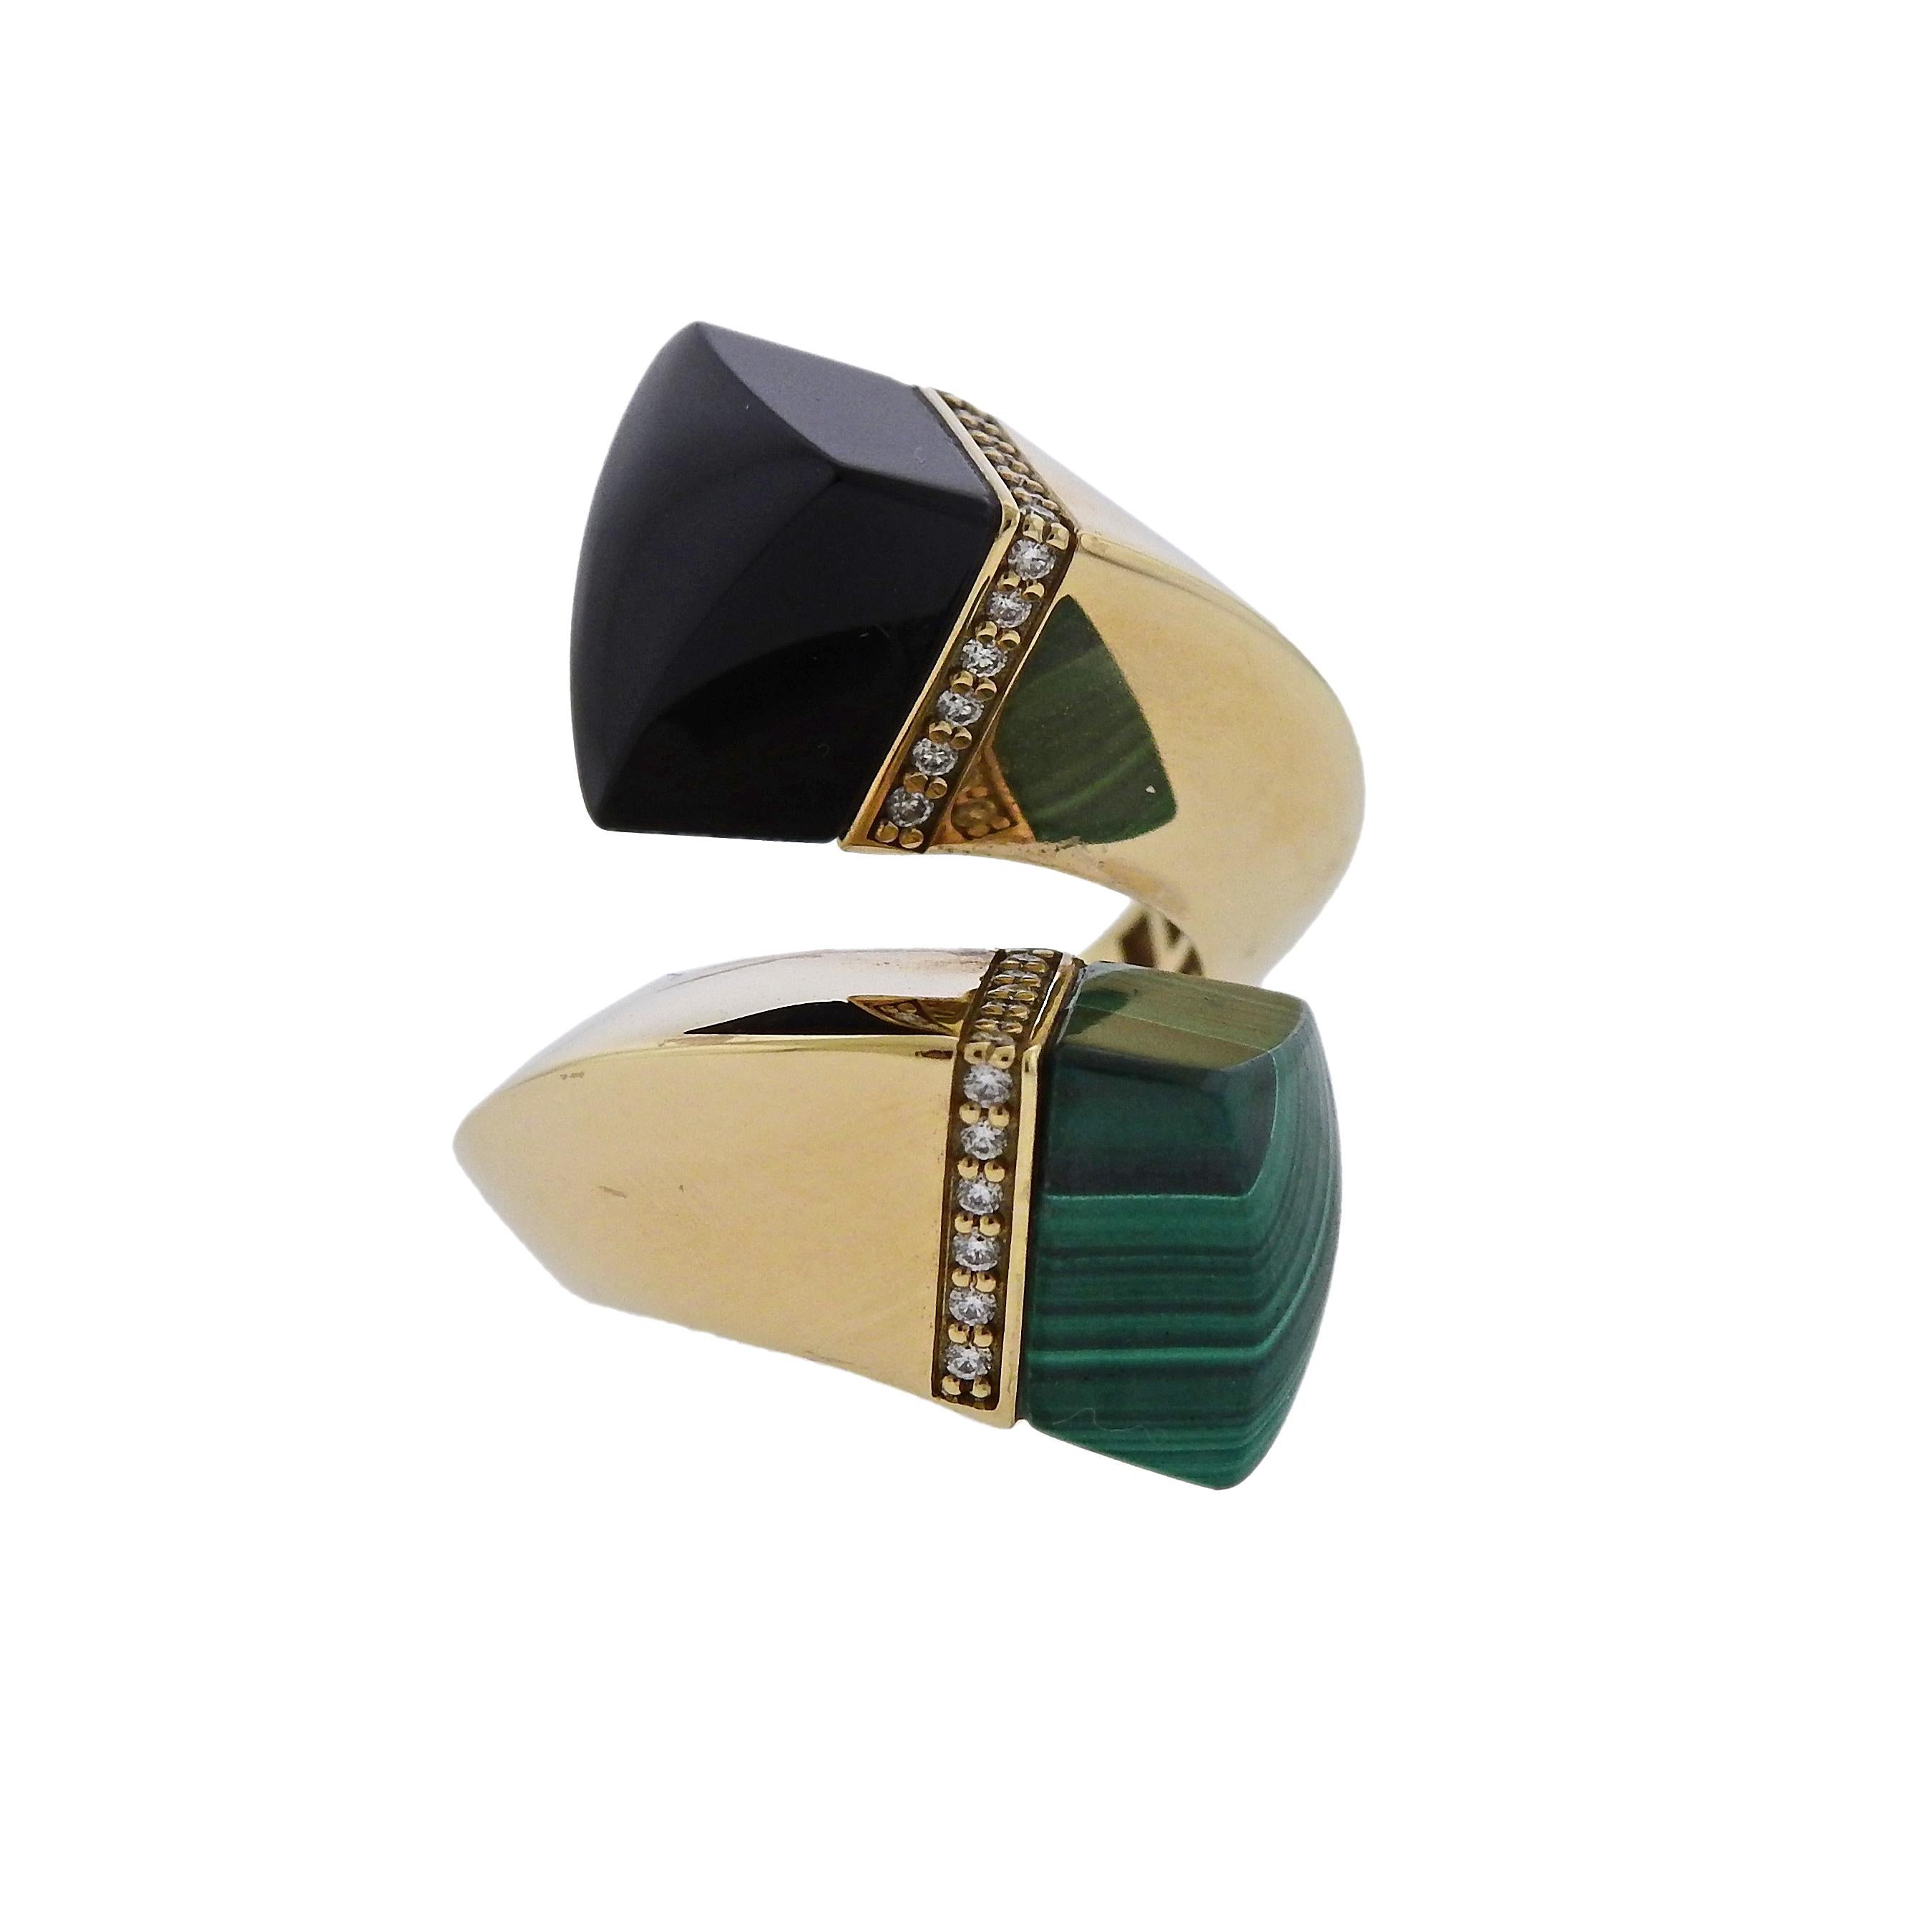 18k yellow gold bypass ring by Oakgem, featuring approx. 0.19ctw in G/VS diamonds, onyx and malachite. Ring size - 6.5, ring top is 29mm wide, weighs 12.7 grams. Marked 18k. 